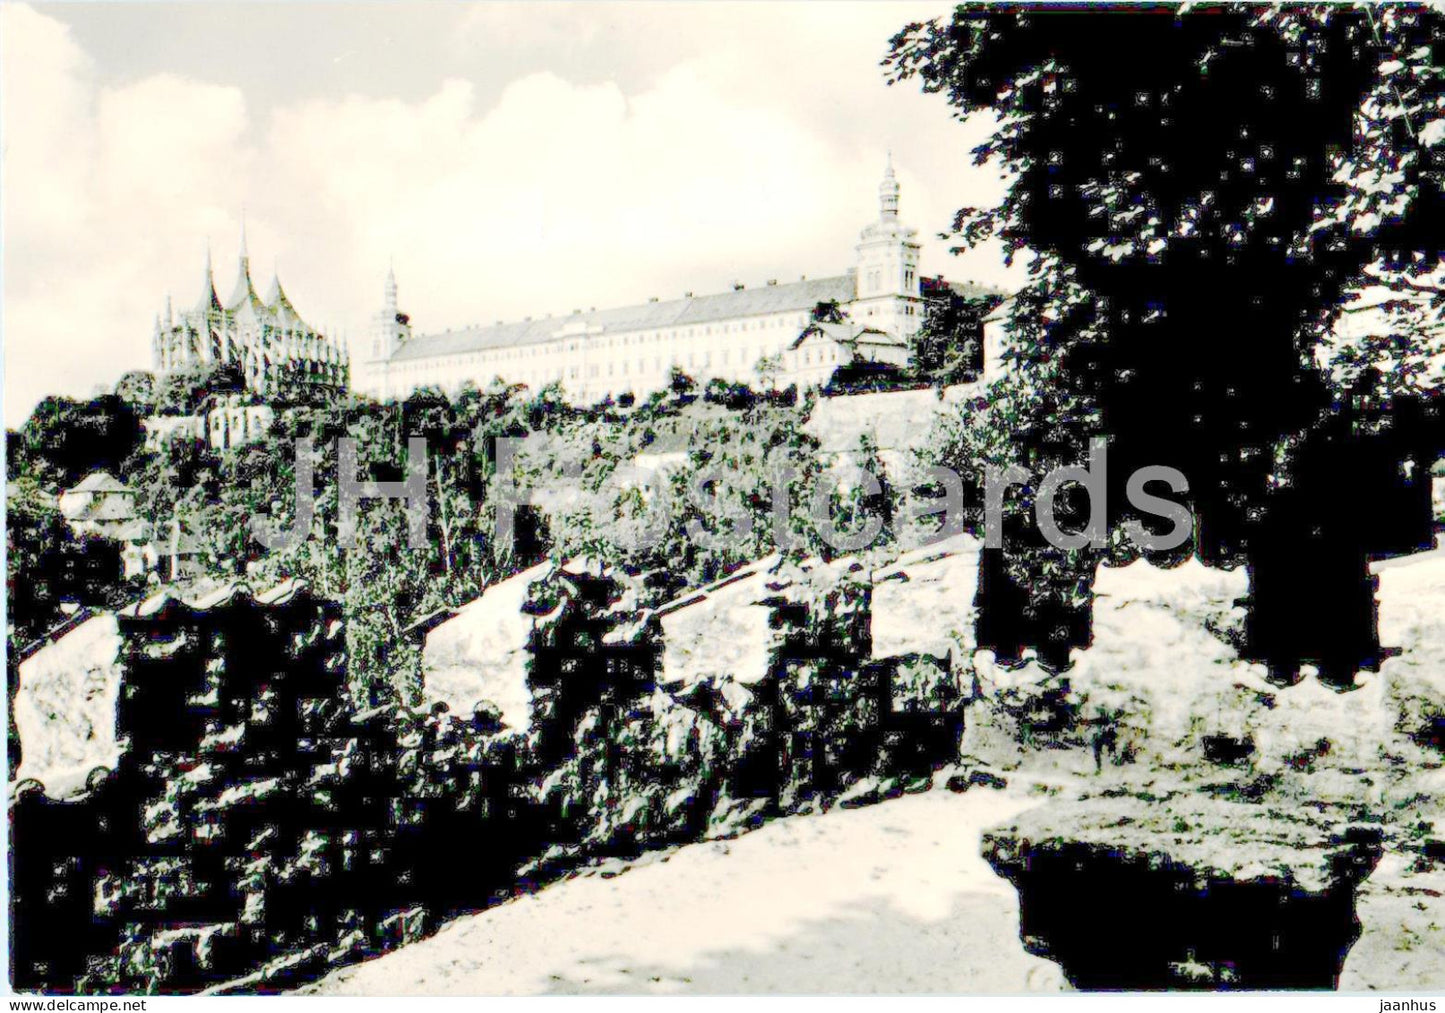 Kutna Hora - St Barbara's cathedral and former Jesuit hostel - 1974 - Czech Repubic - Czechoslovakia - used - JH Postcards